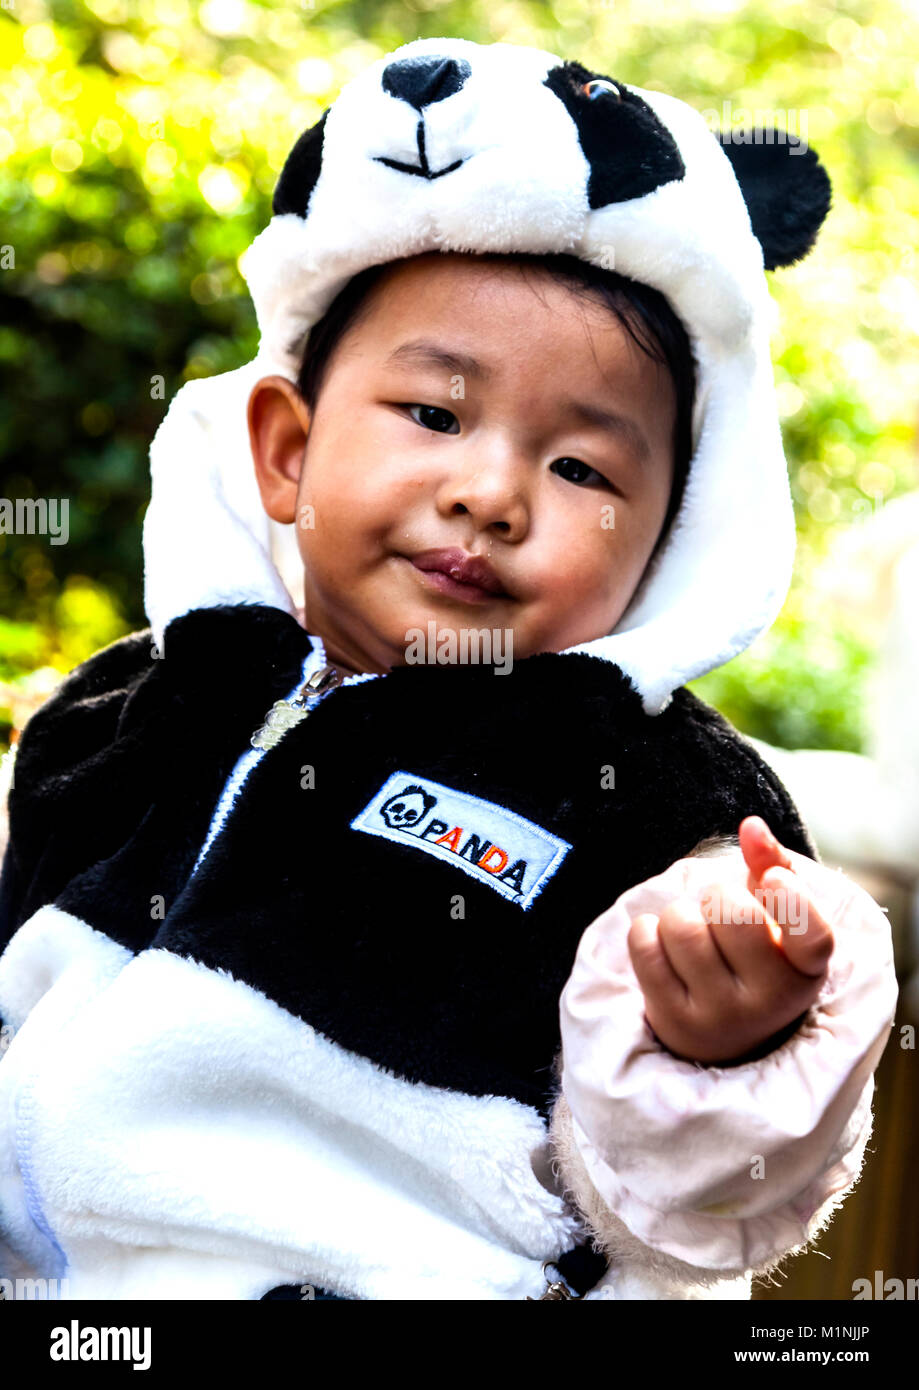 Chinese boy in Panda suit bought at the Chengdu Research Base of Giant Panda Breeding in China Stock Photo